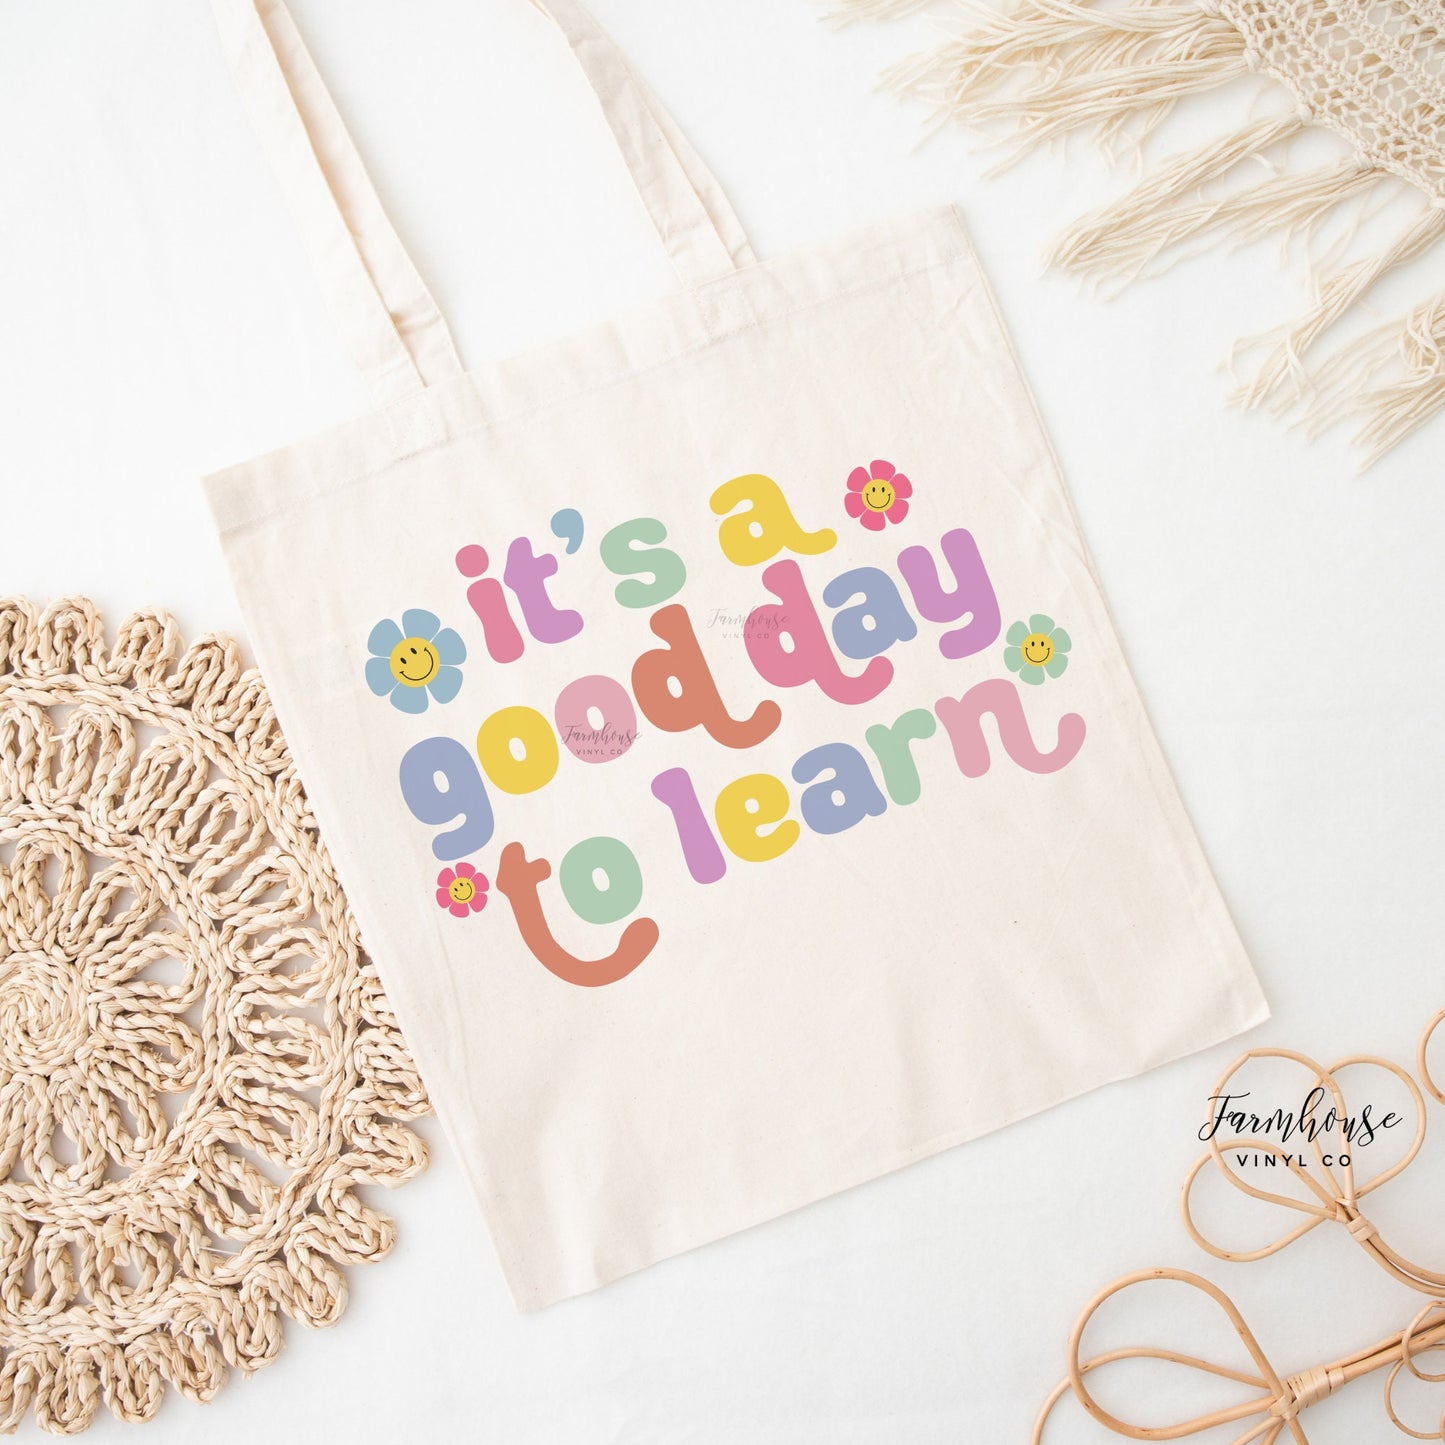 It's A Good Day to Learn Tote Bag - Farmhouse Vinyl Co